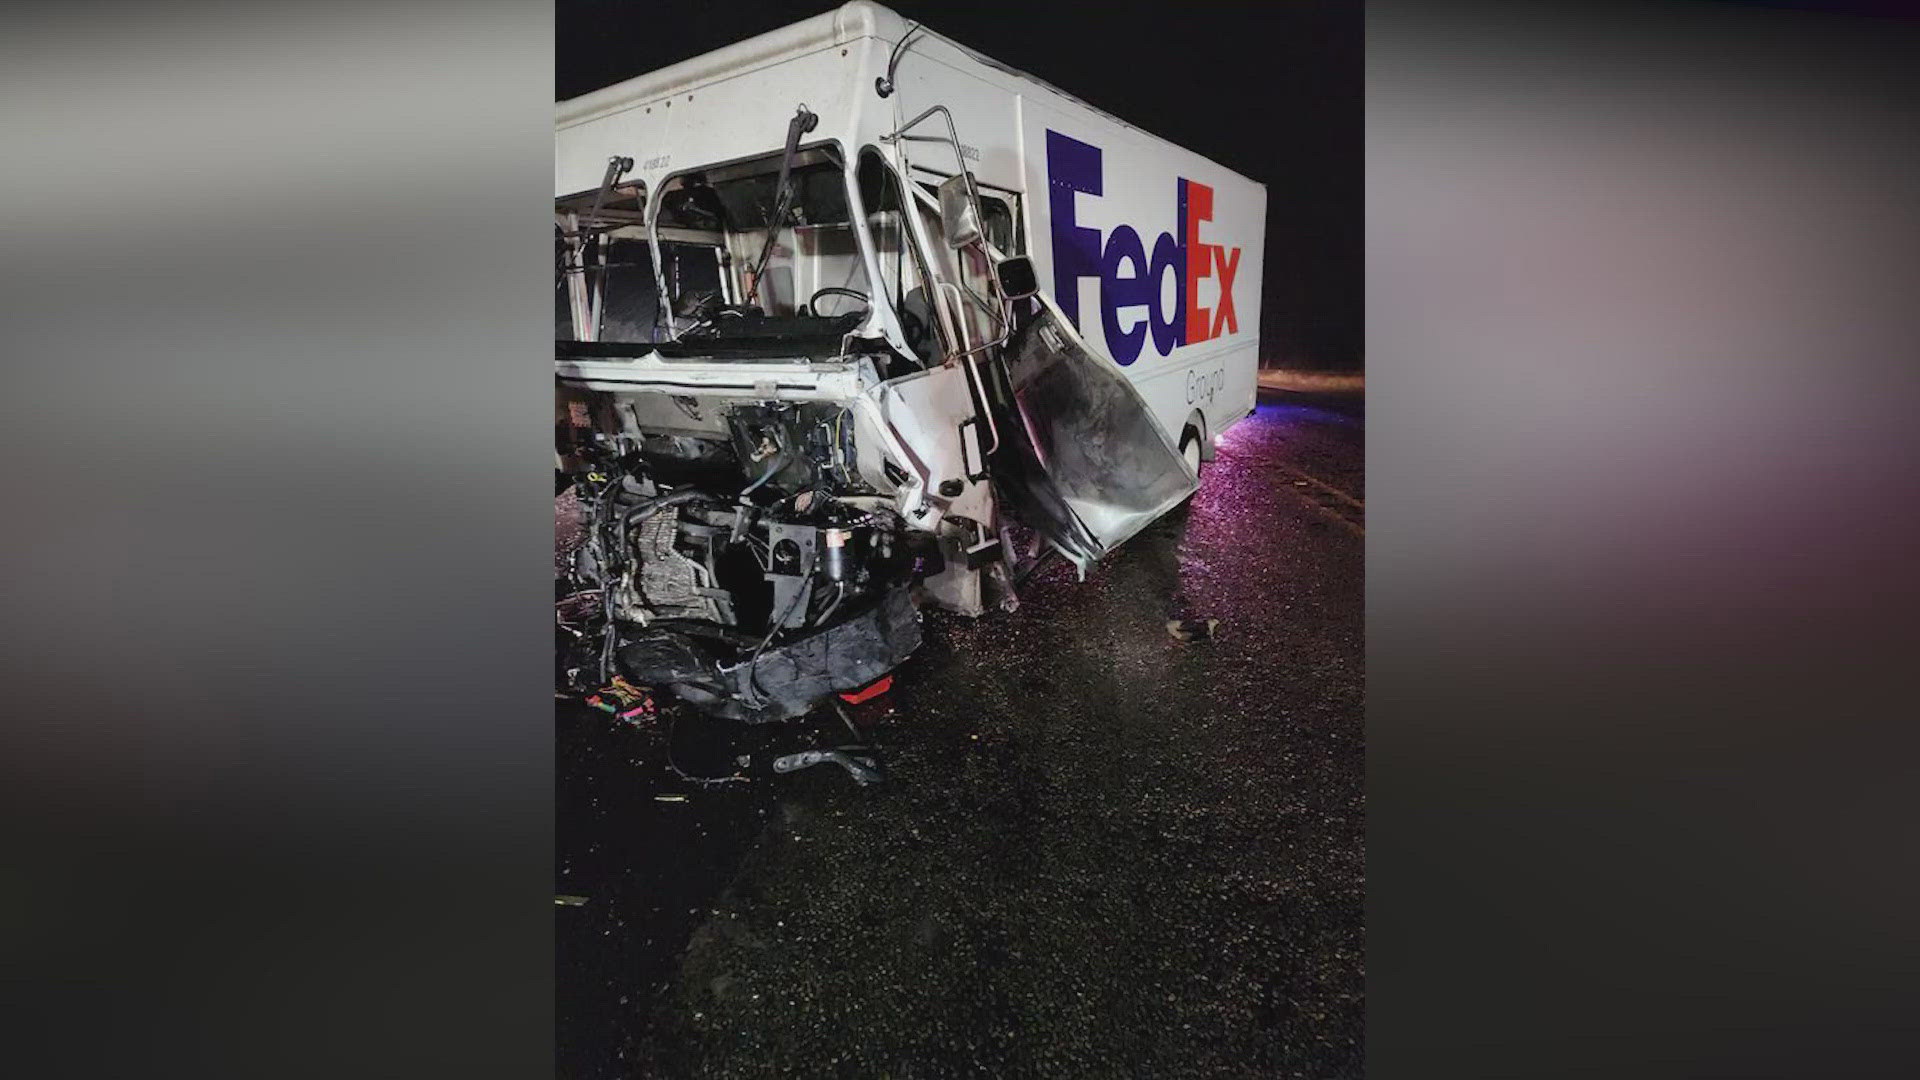 The family was killed when a Ford box truck veered into the wrong side of the roadway along U.S. Highway 57, crashing head-on into their vehicle.